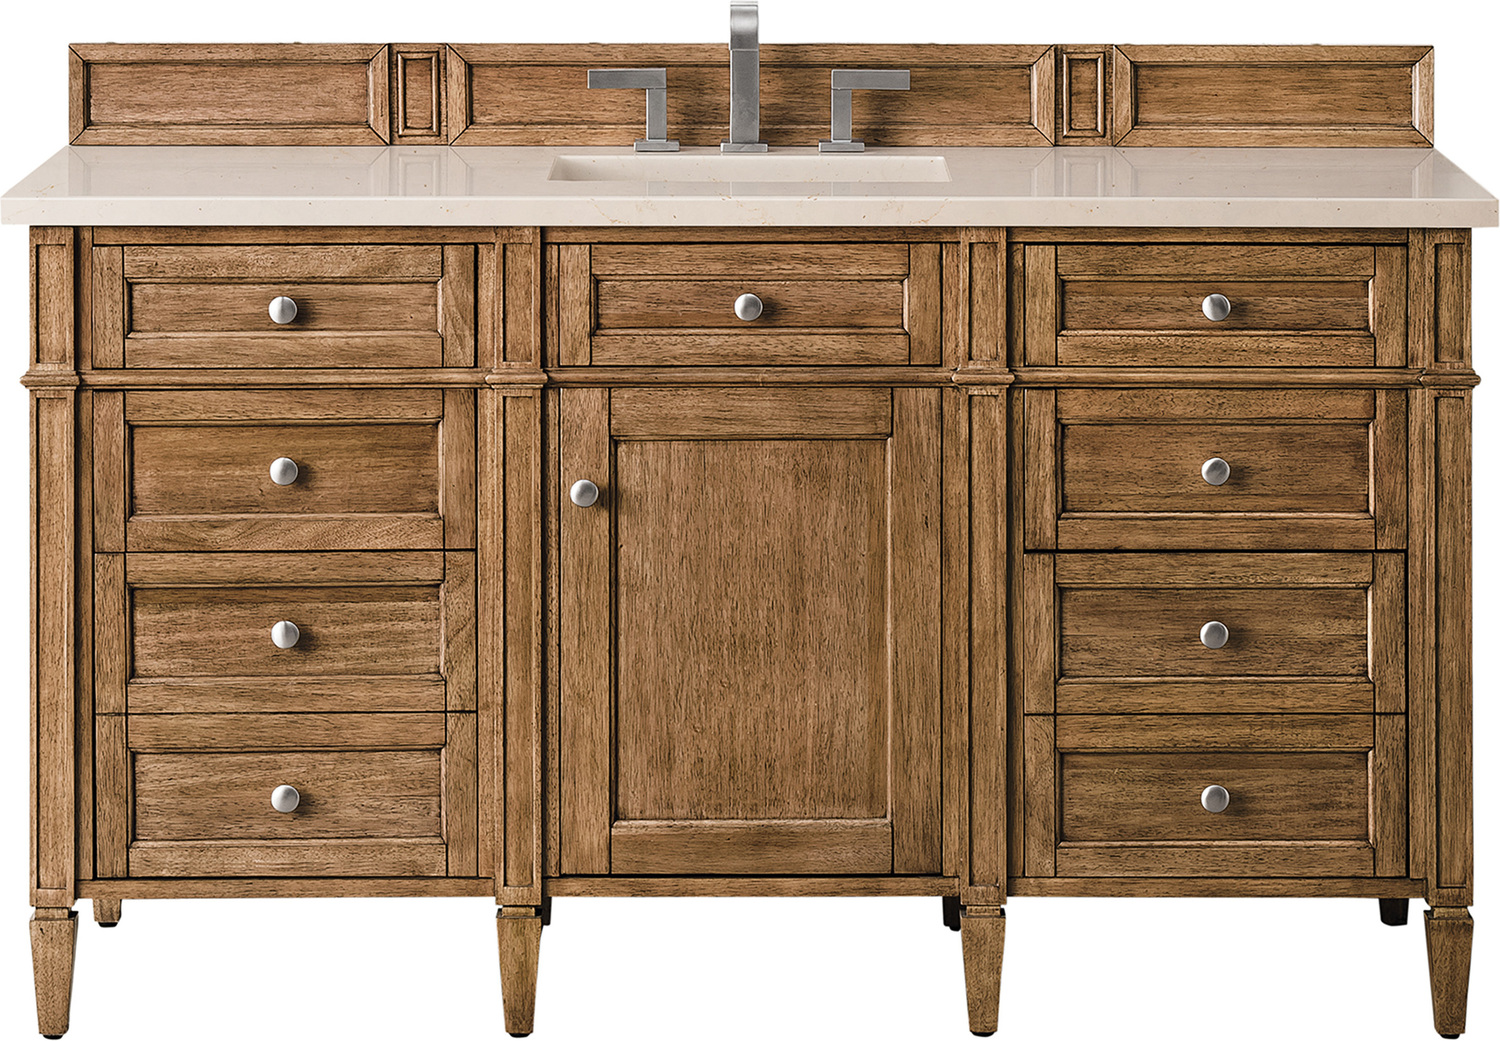 70 inch vanity top double sink James Martin Vanity Saddle Brown Transitional